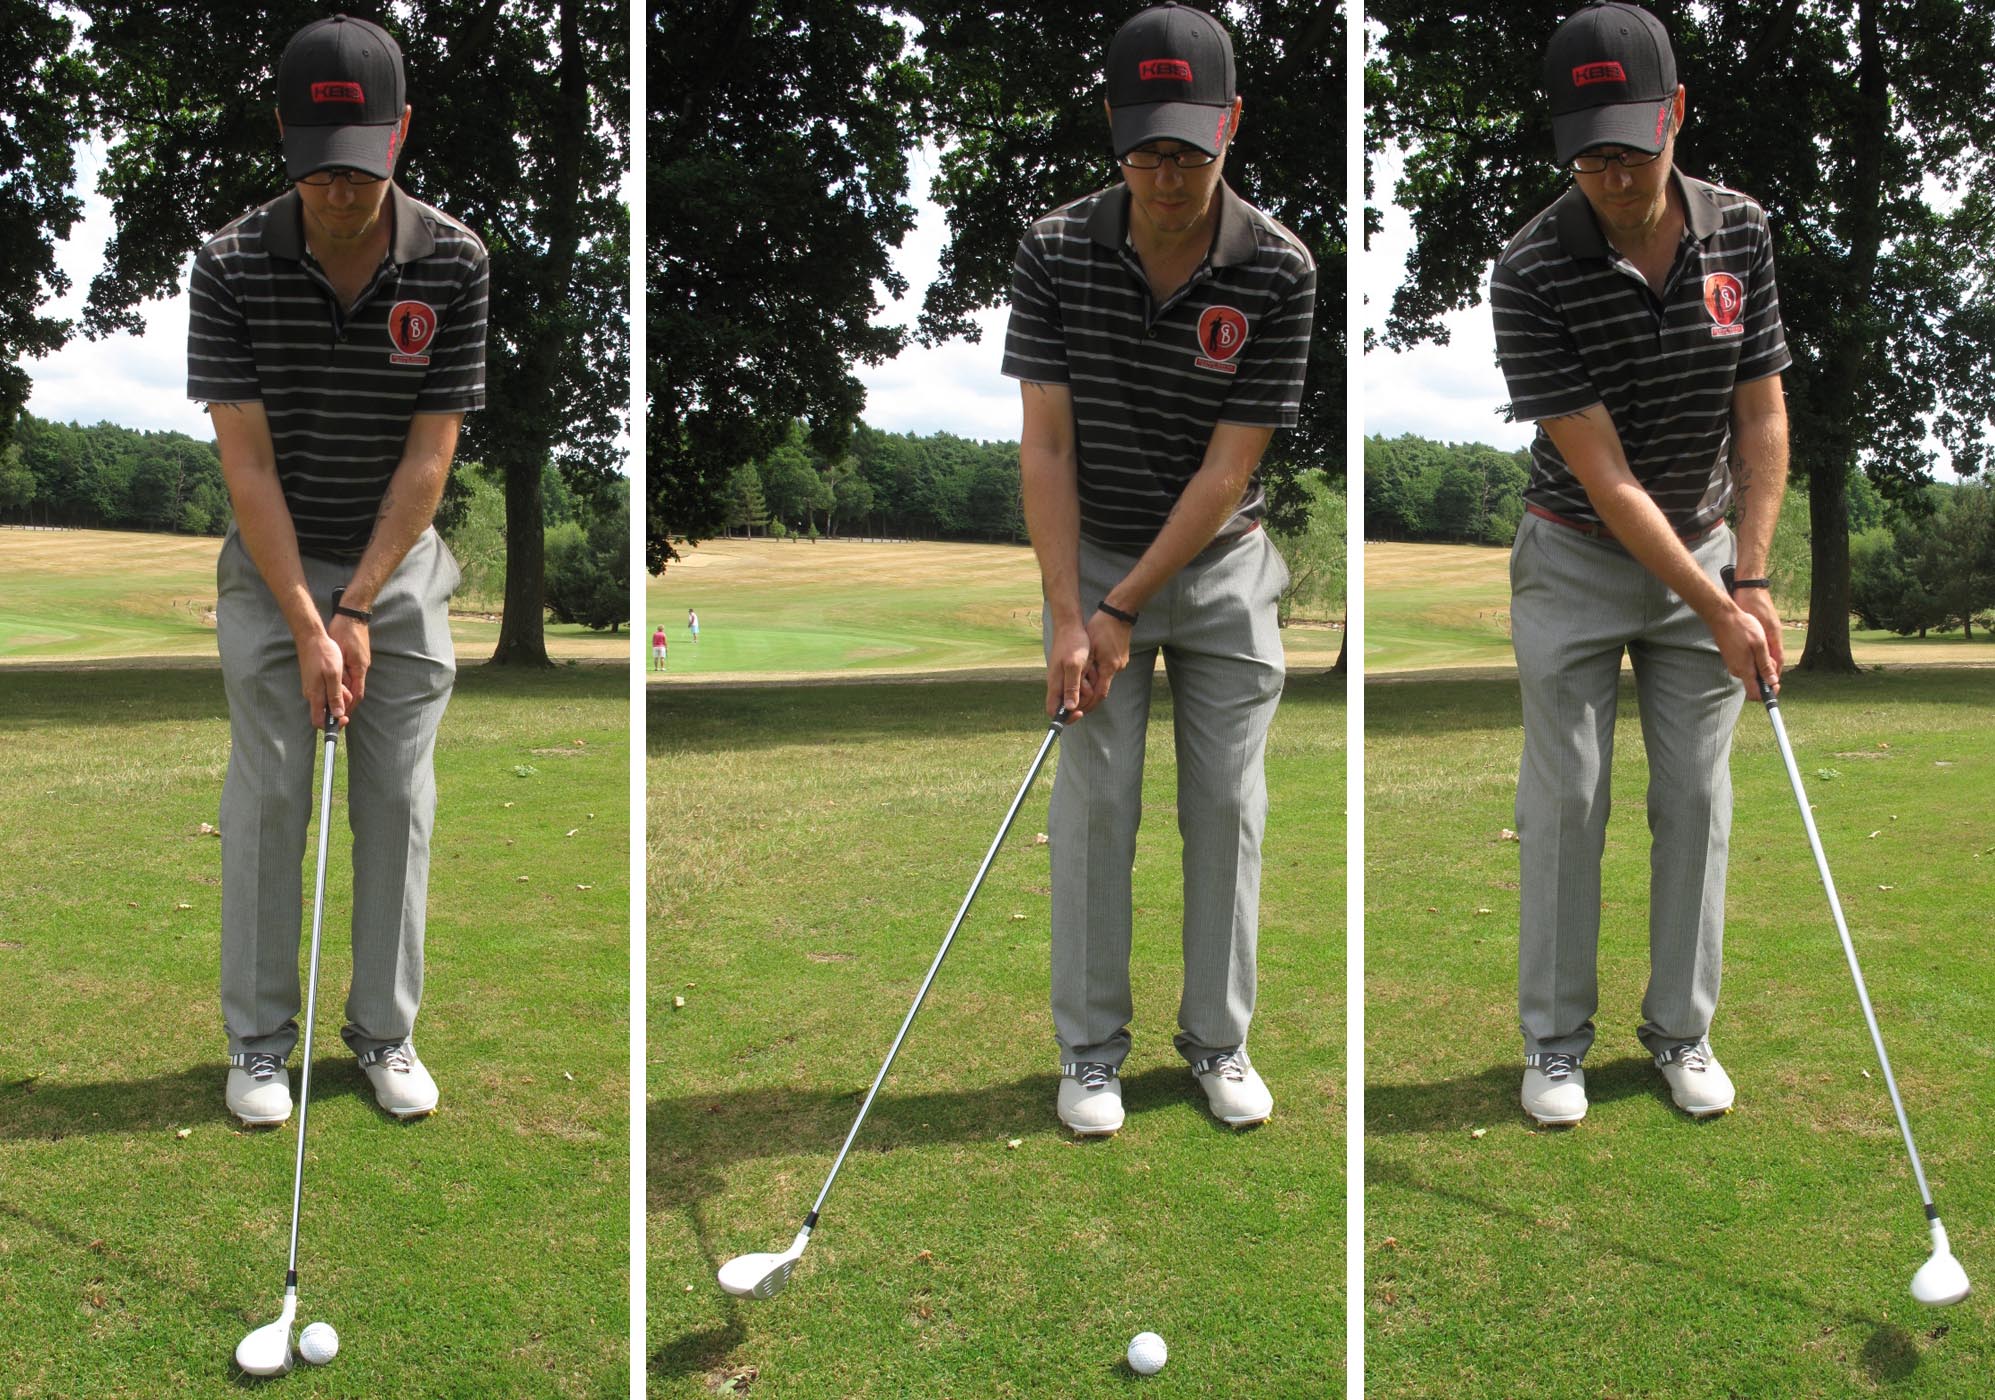 Chipping with a rescue club is a new way to chip and run. Drill it and see how it goes